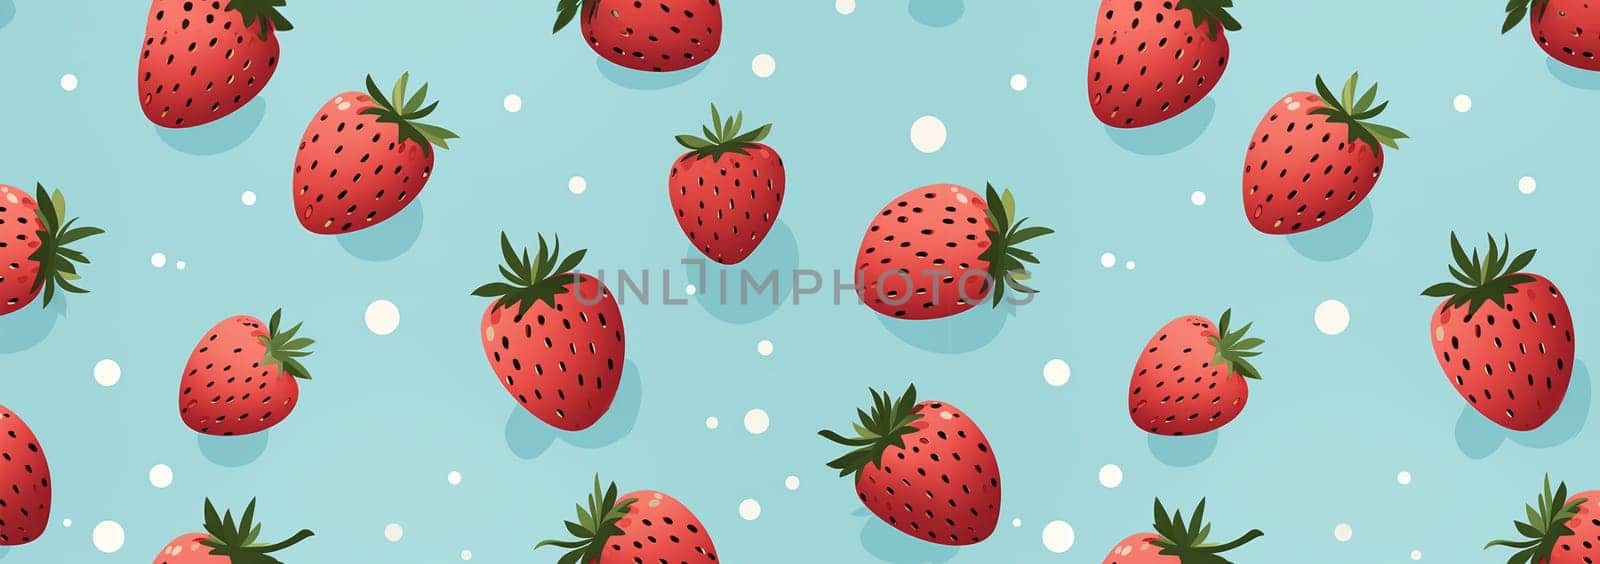 Banner Cute Strawberry Pattern, Red and blue seamless polka dot strawberry, Strawberry white Background, Strawberry Wallpaper Love Cards Stock Illustration. Adorable strawberries background Copy space